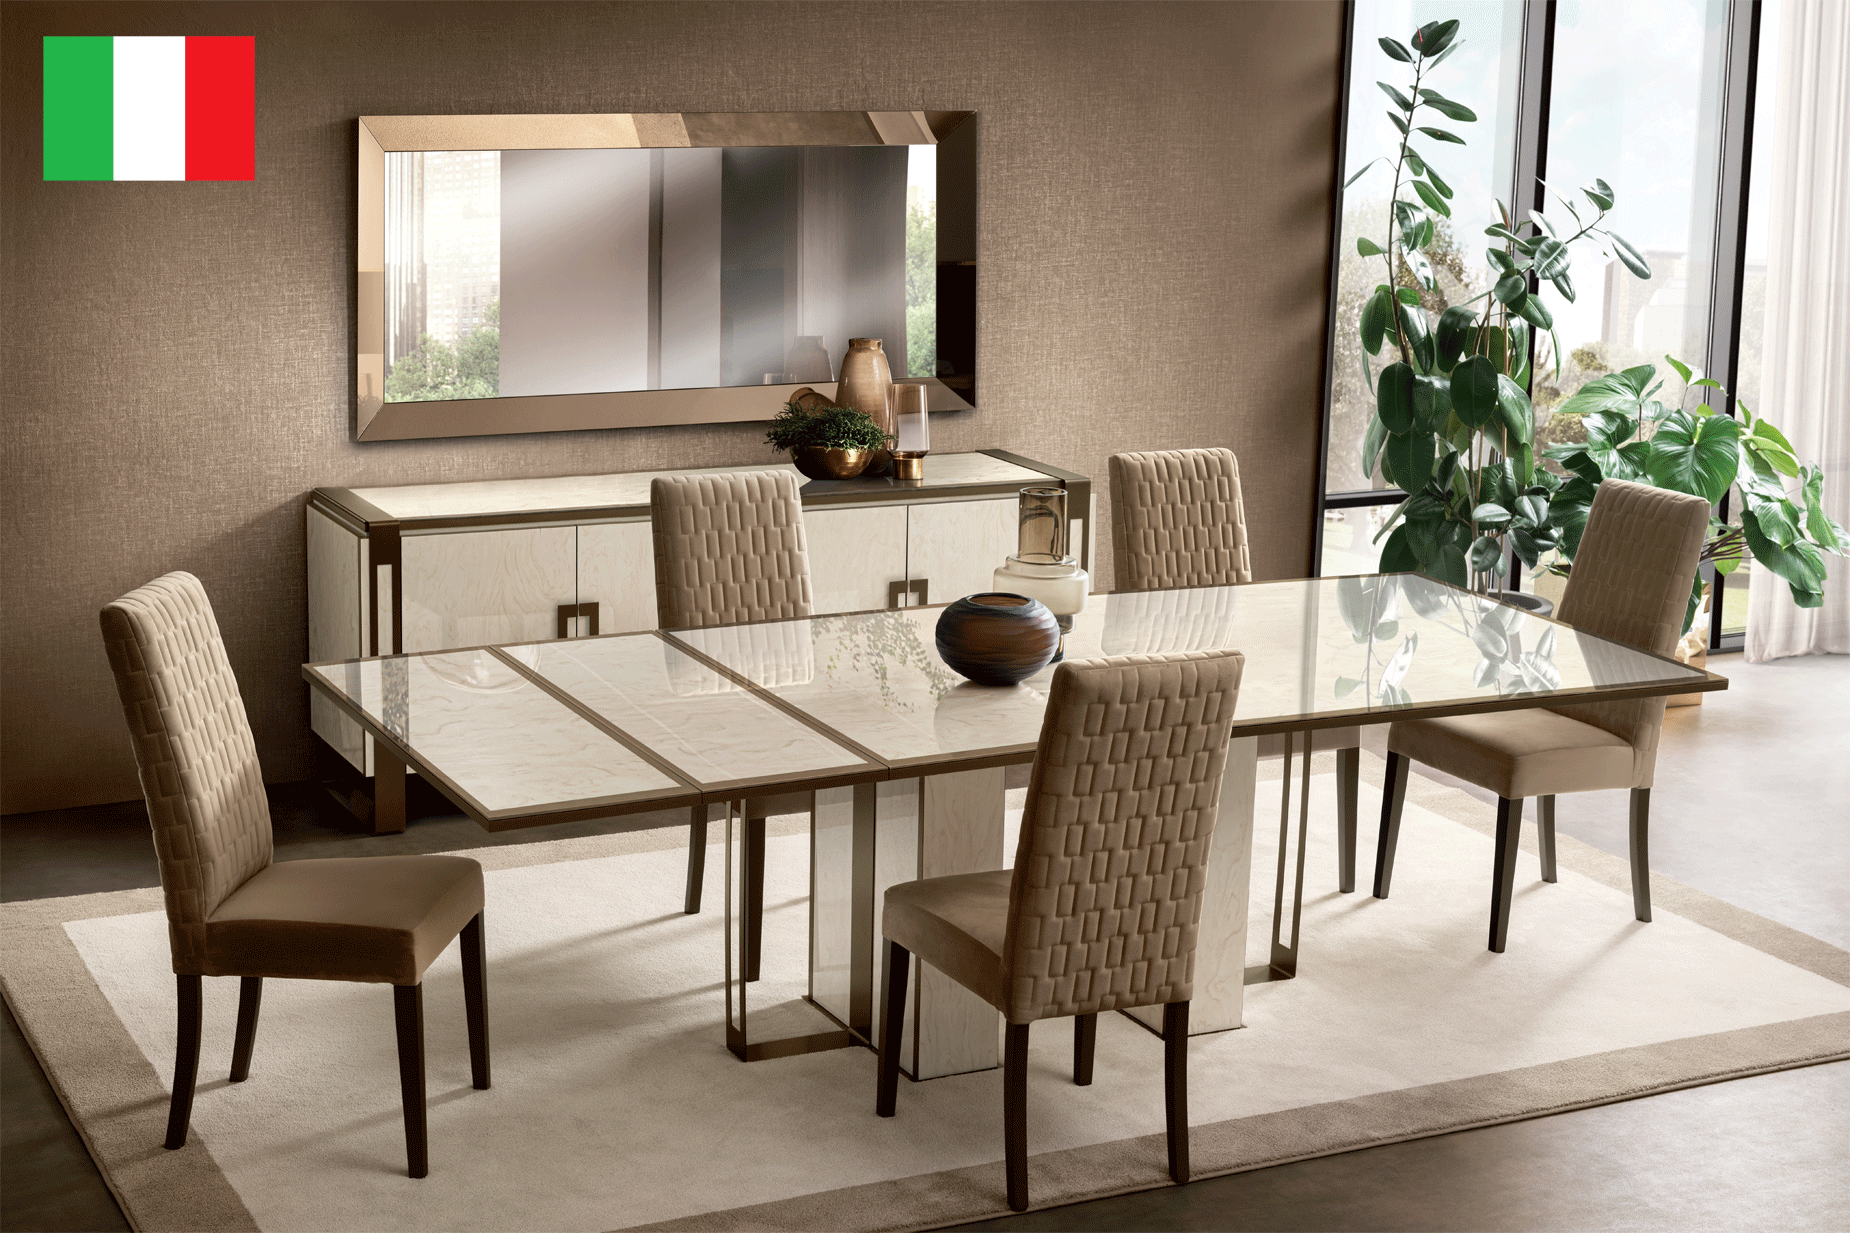 Brands Arredoclassic Living Room, Italy Poesia Dining Room